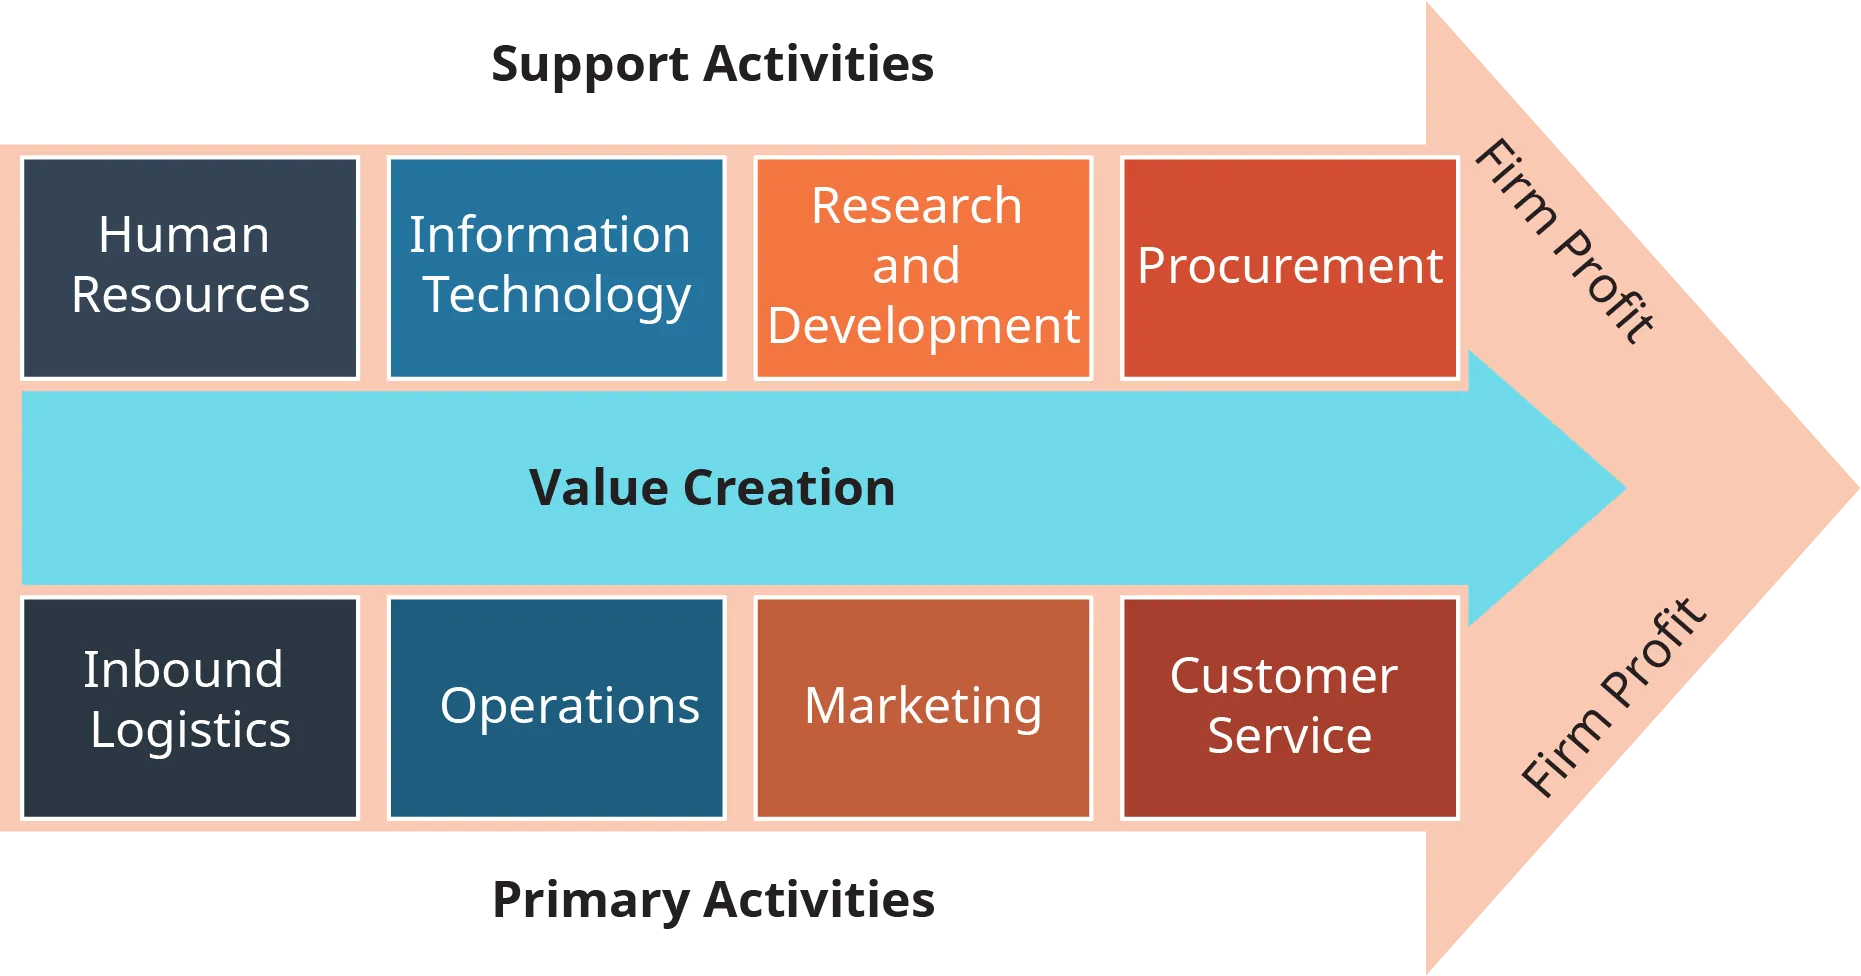 A diagram illustrates a hypothetical value chain for some of Walmart’s activities.